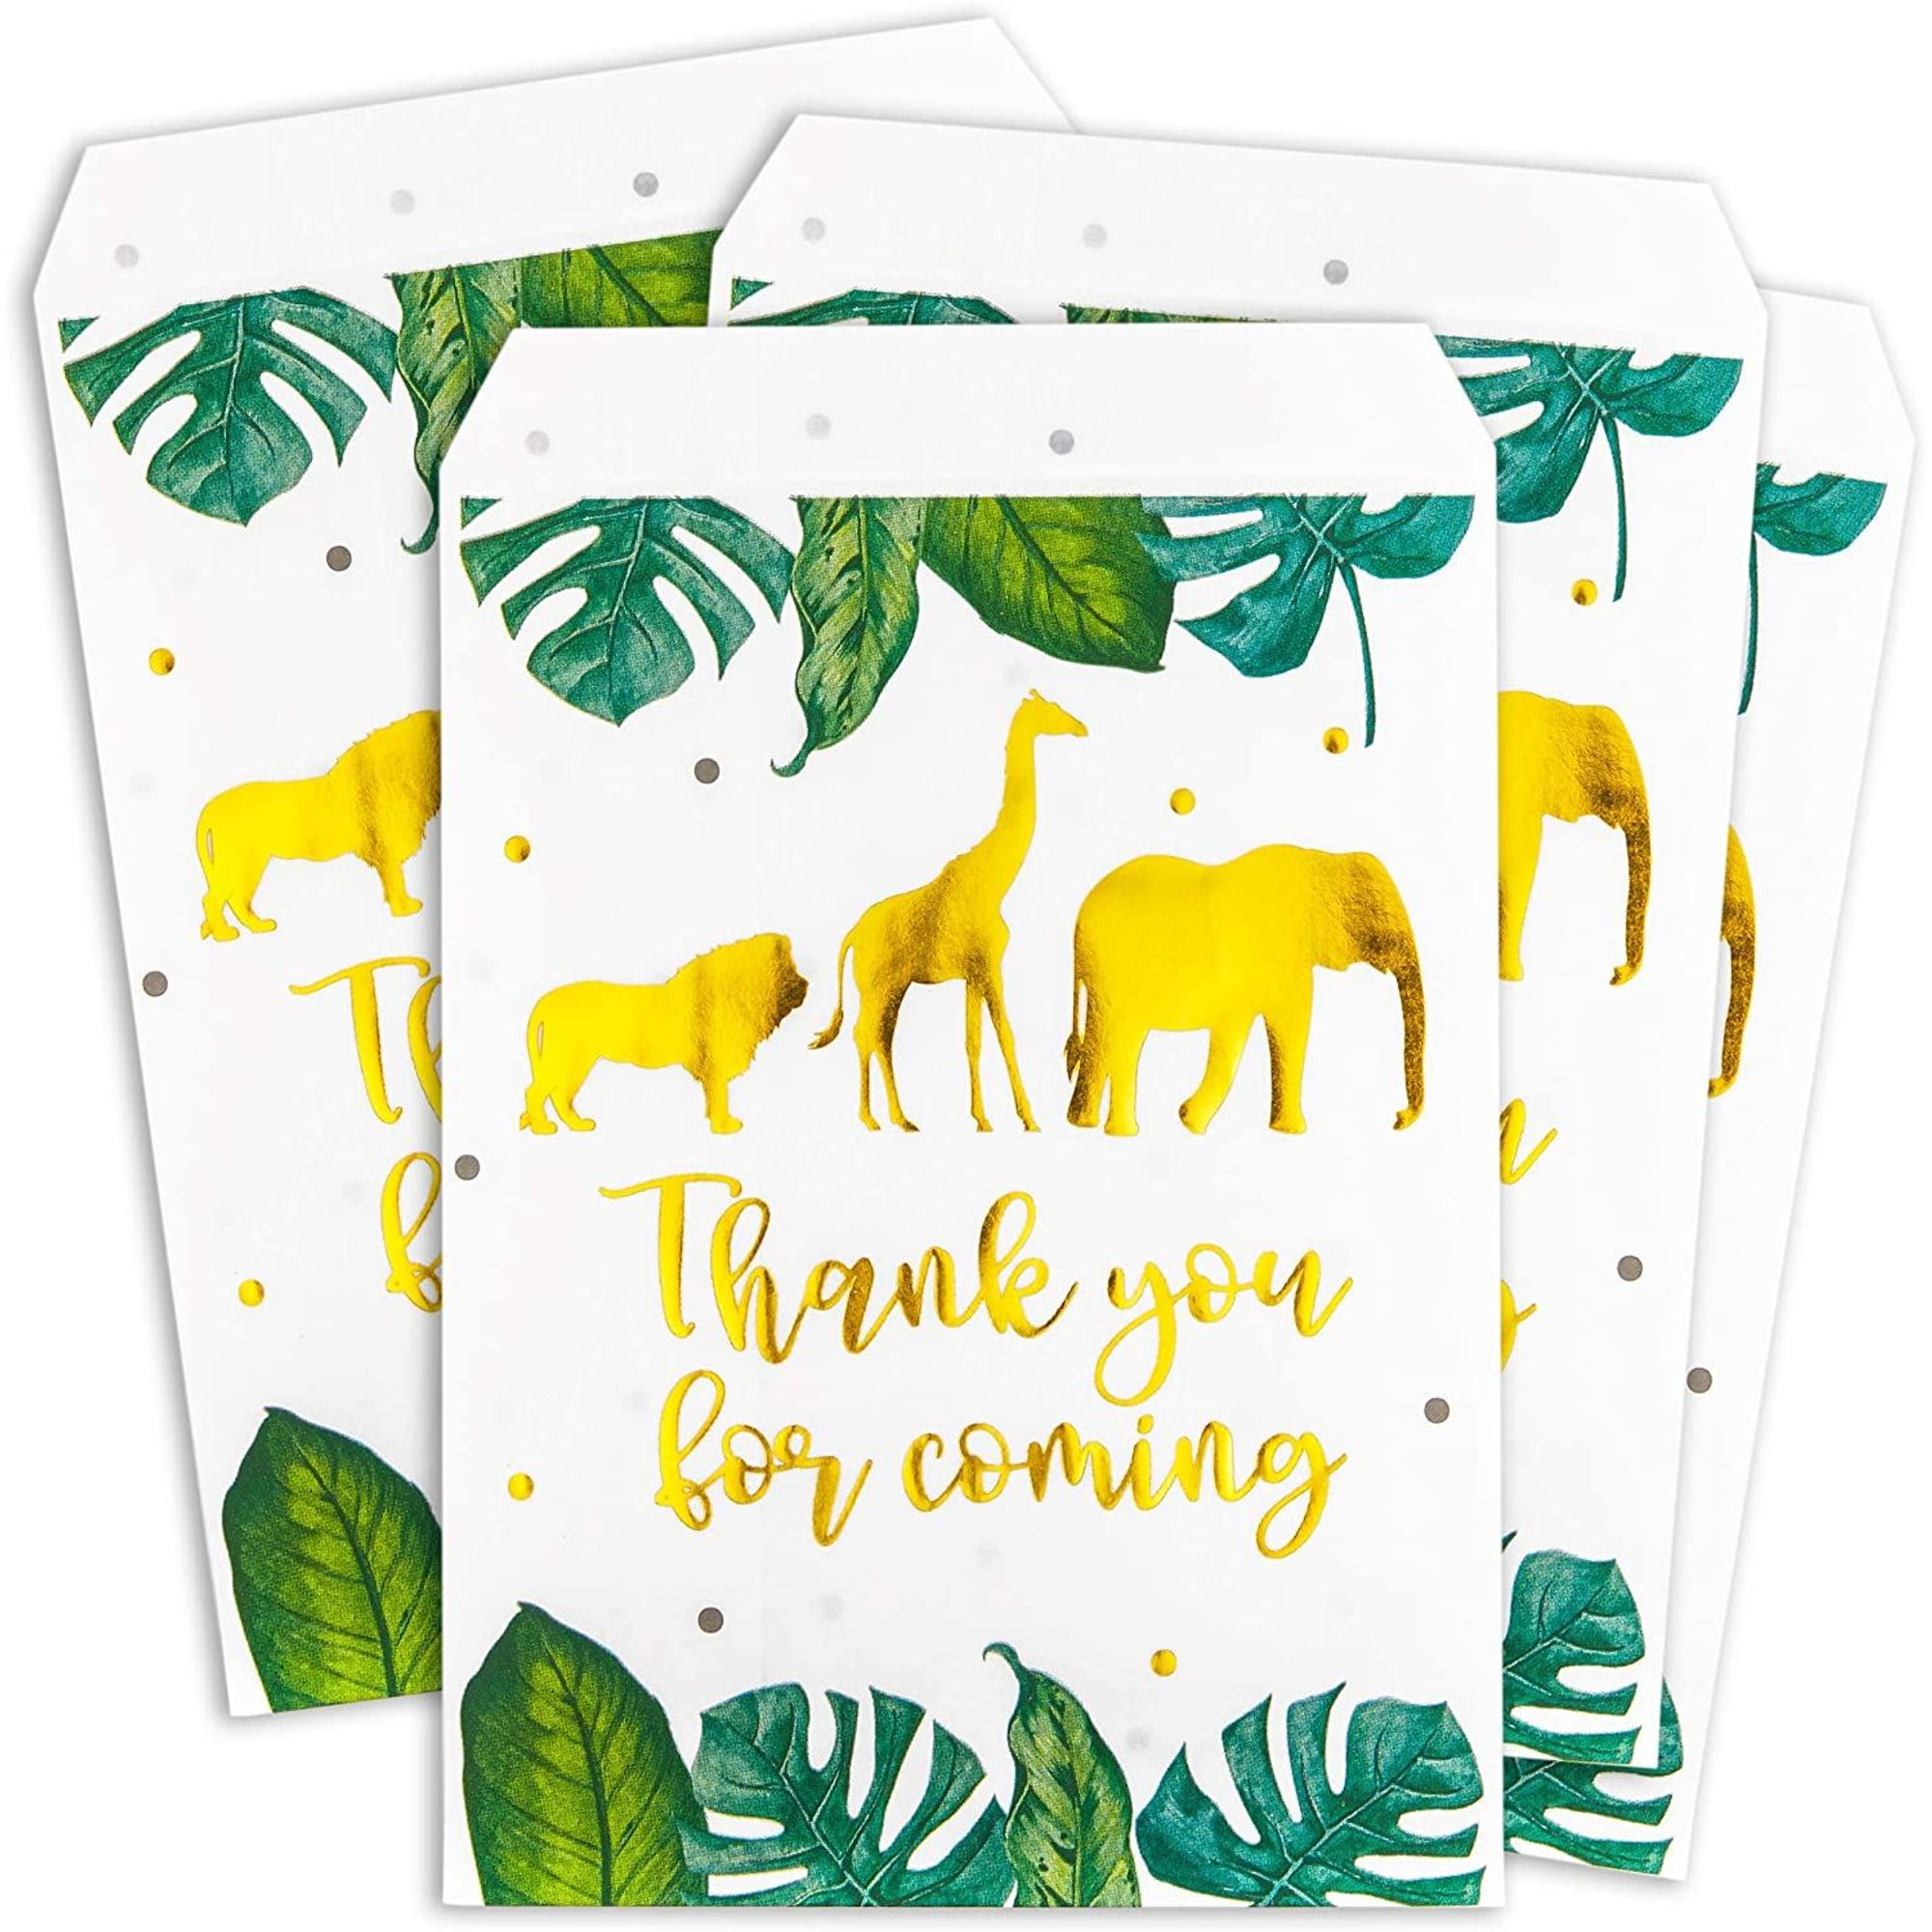 Small fresh envelope bags Featured Image